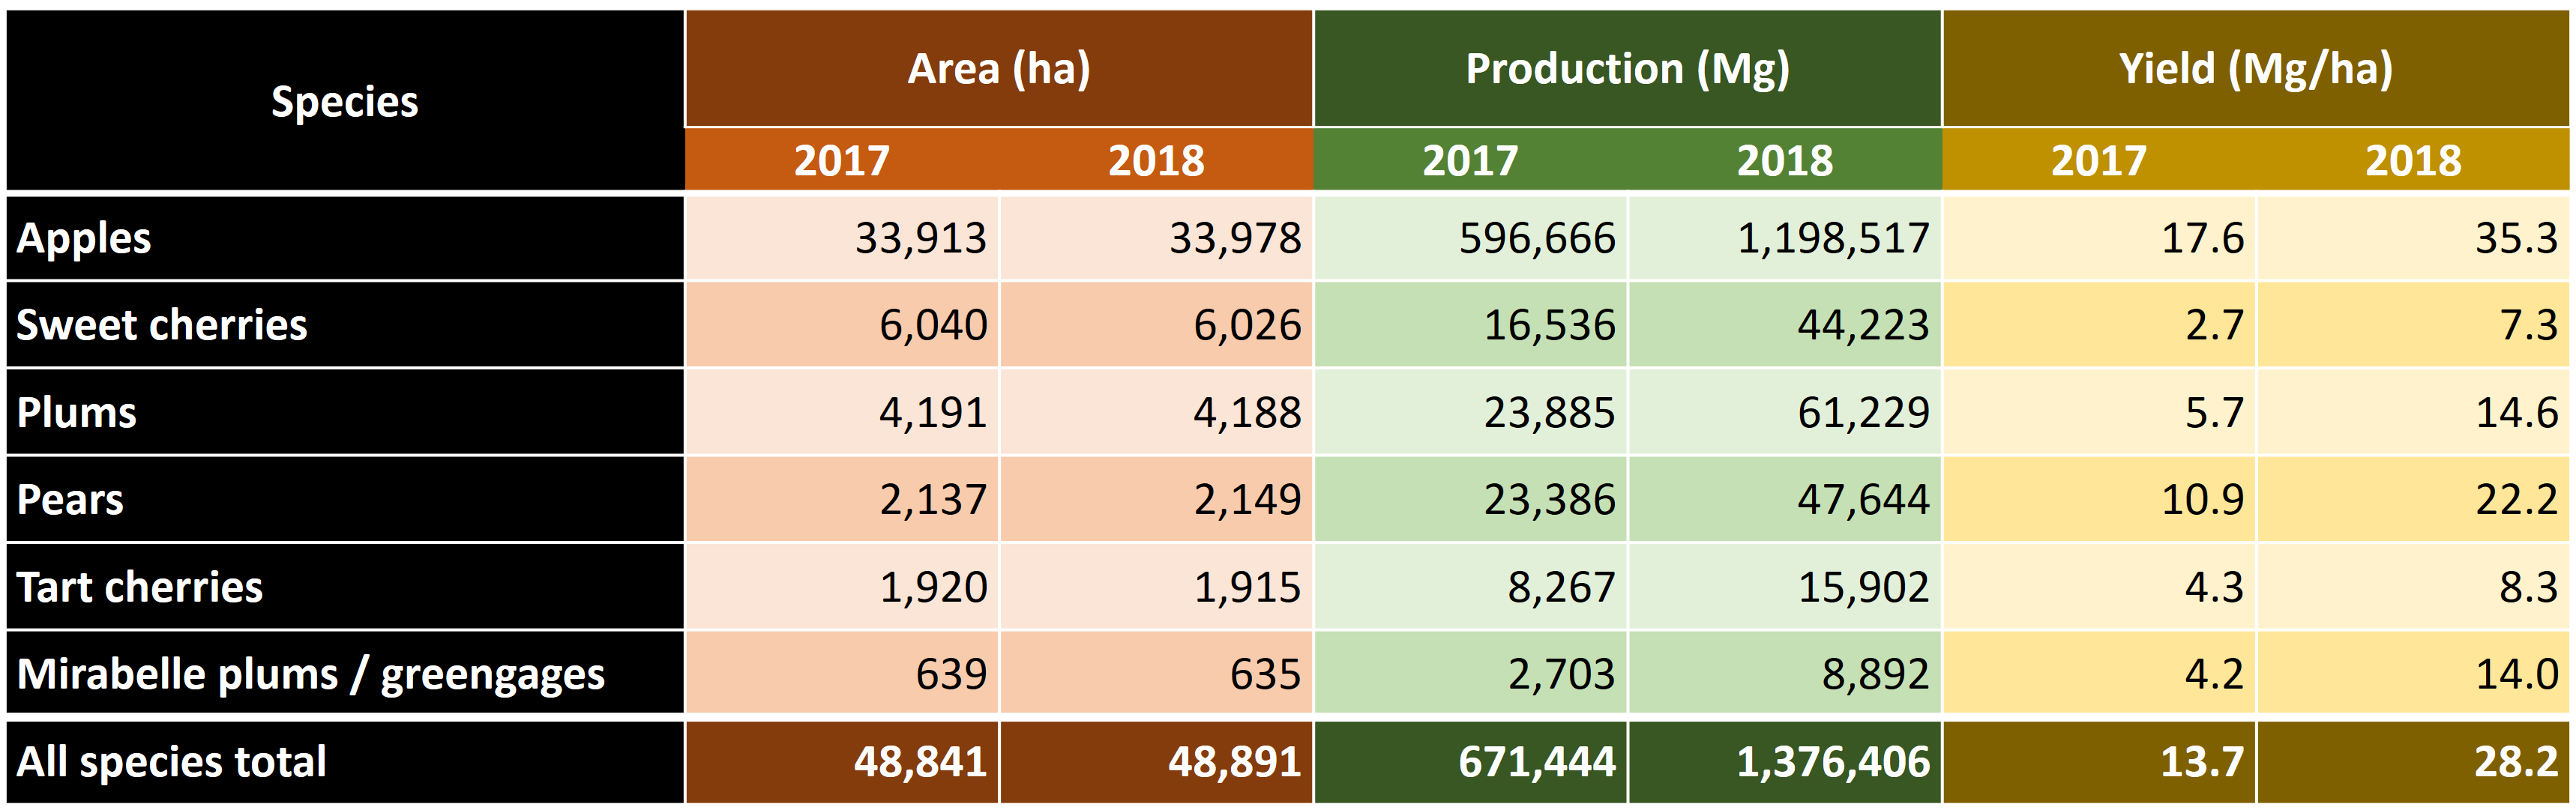 Area, production and yield of major fruit trees in Germany in 2017 and 2018. Note the dramatic yield difference between these years. In 2017, orchards in much of the country were hit by a major spring frost event, which caused severe damage to tree flowers DESTATIS; Statistisches Bundesamt.